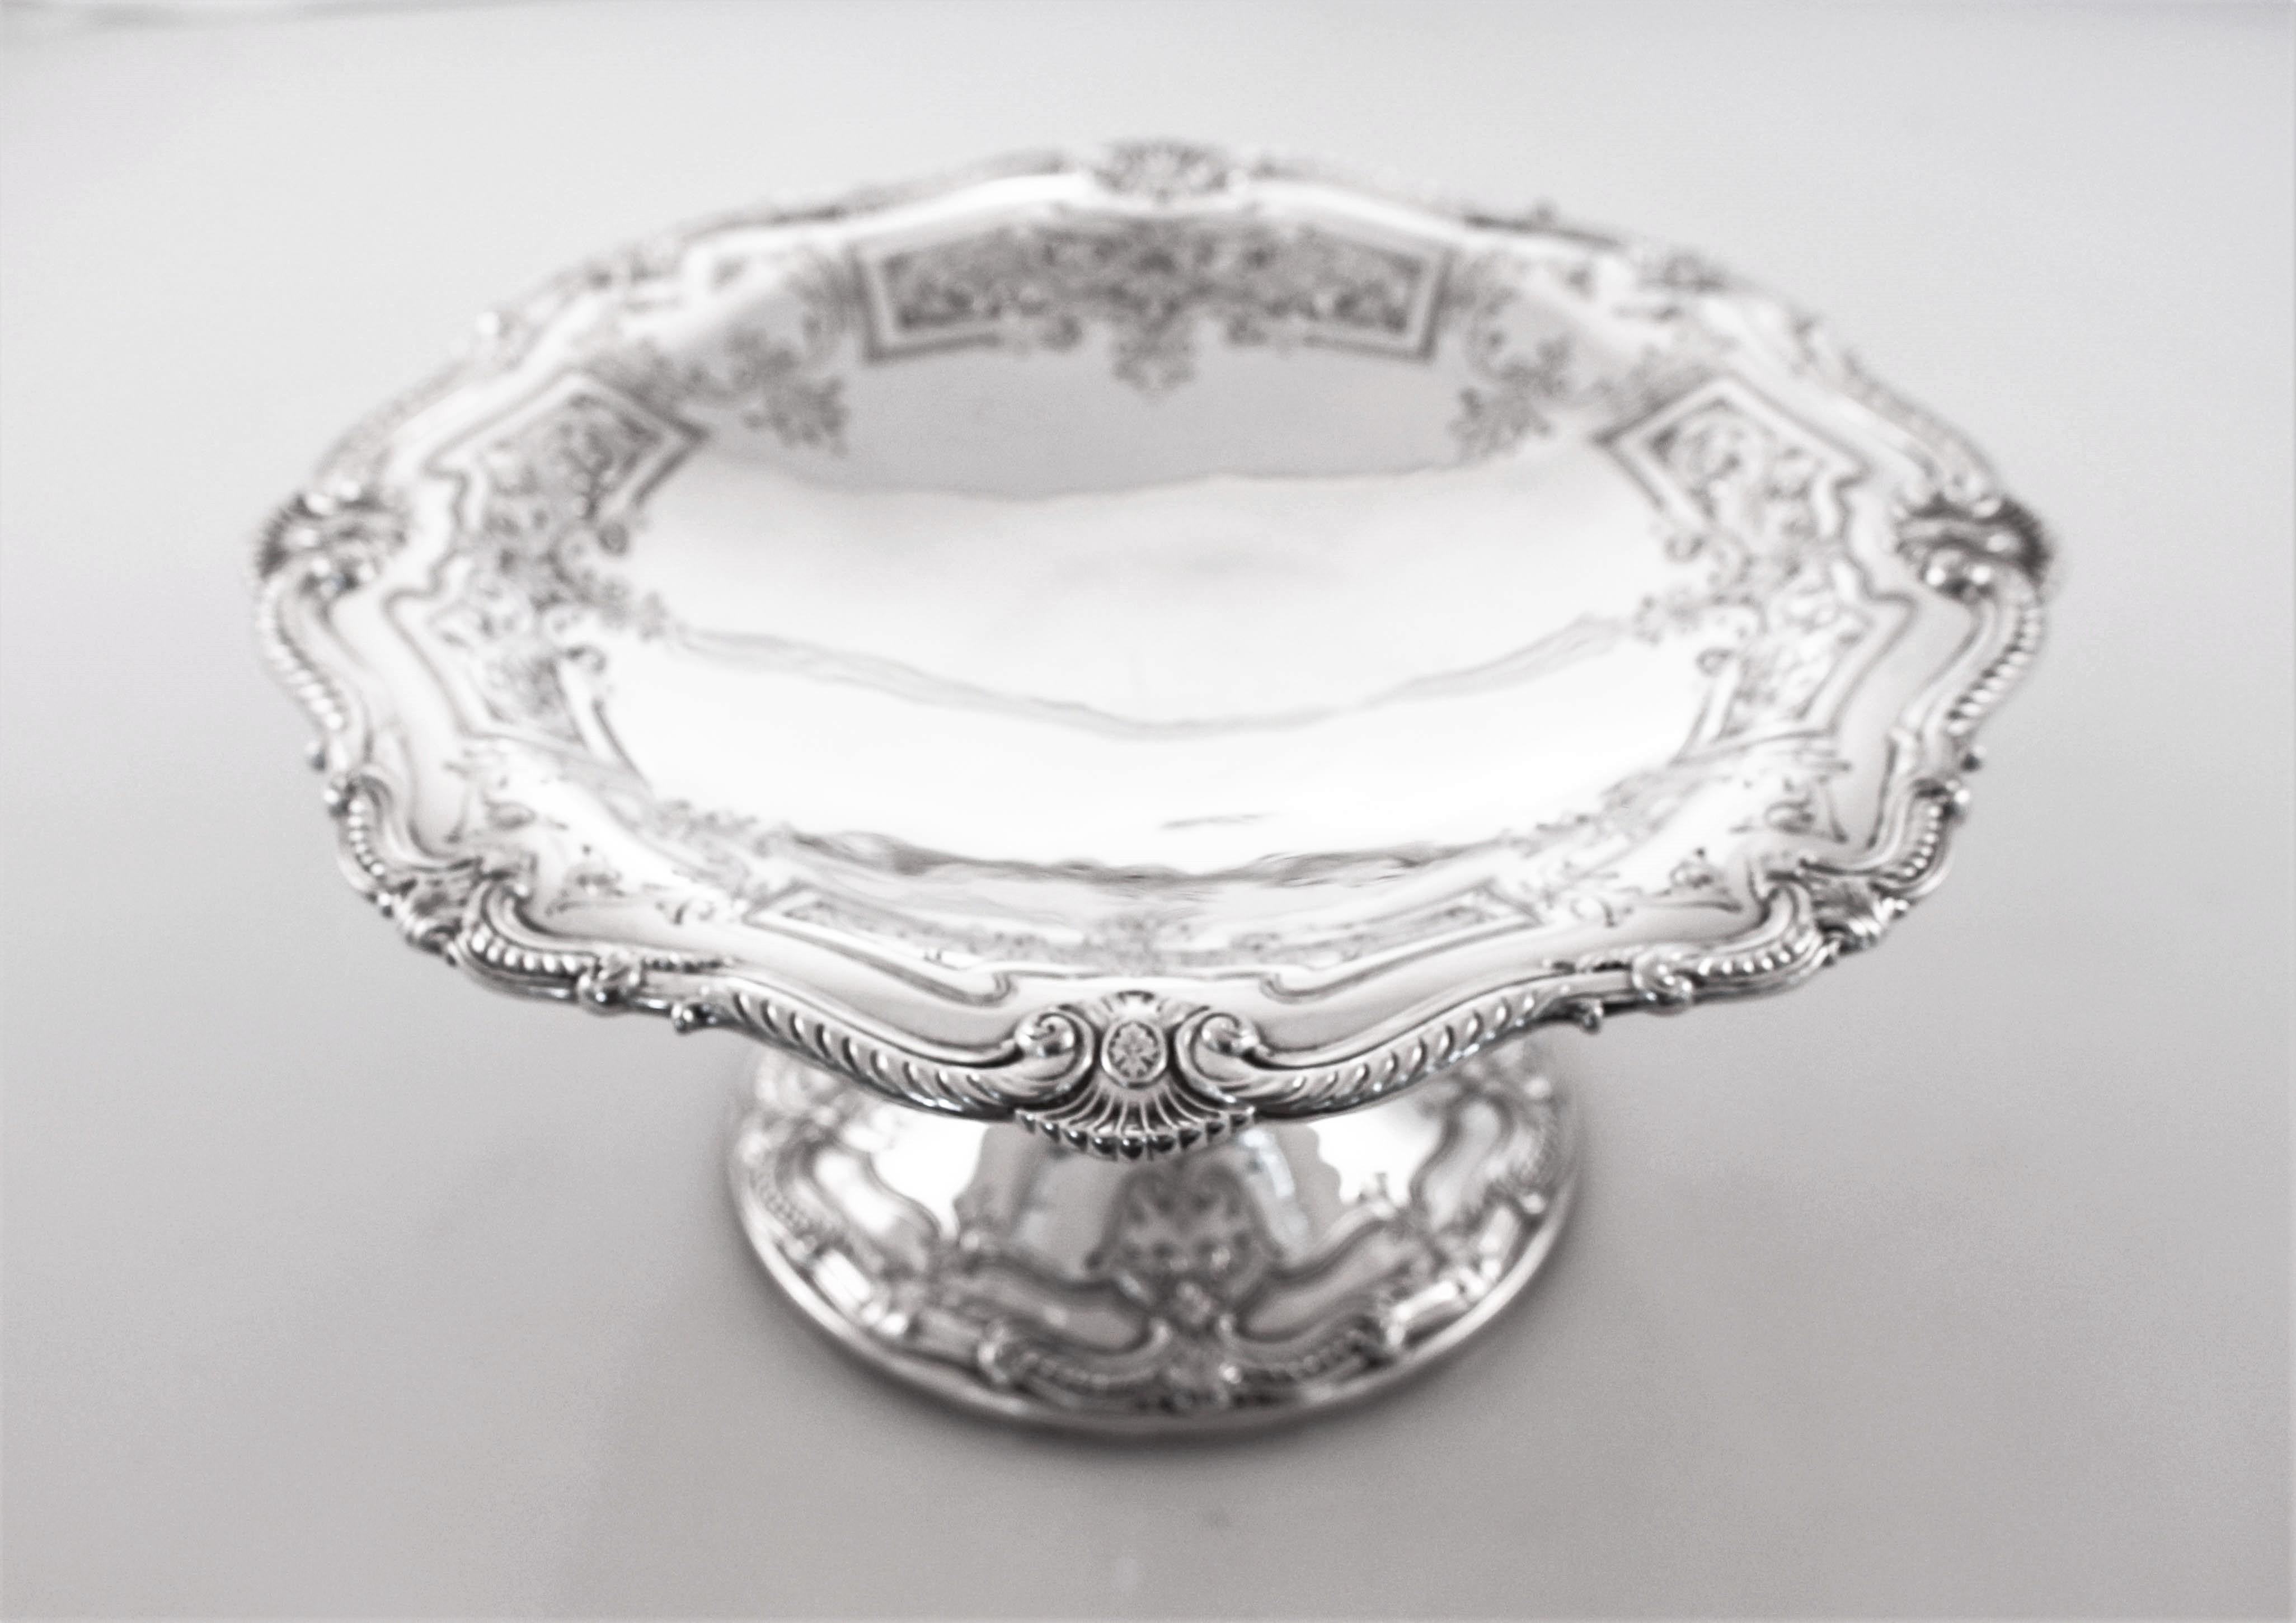 We are delighted to offer this pair of sterling silver compotes by the Grogan Silver Company. They have a scalloped rim with a gadroon pattern. There is also a beautifully etched design with swirls and garlands decorating the both the top and base.